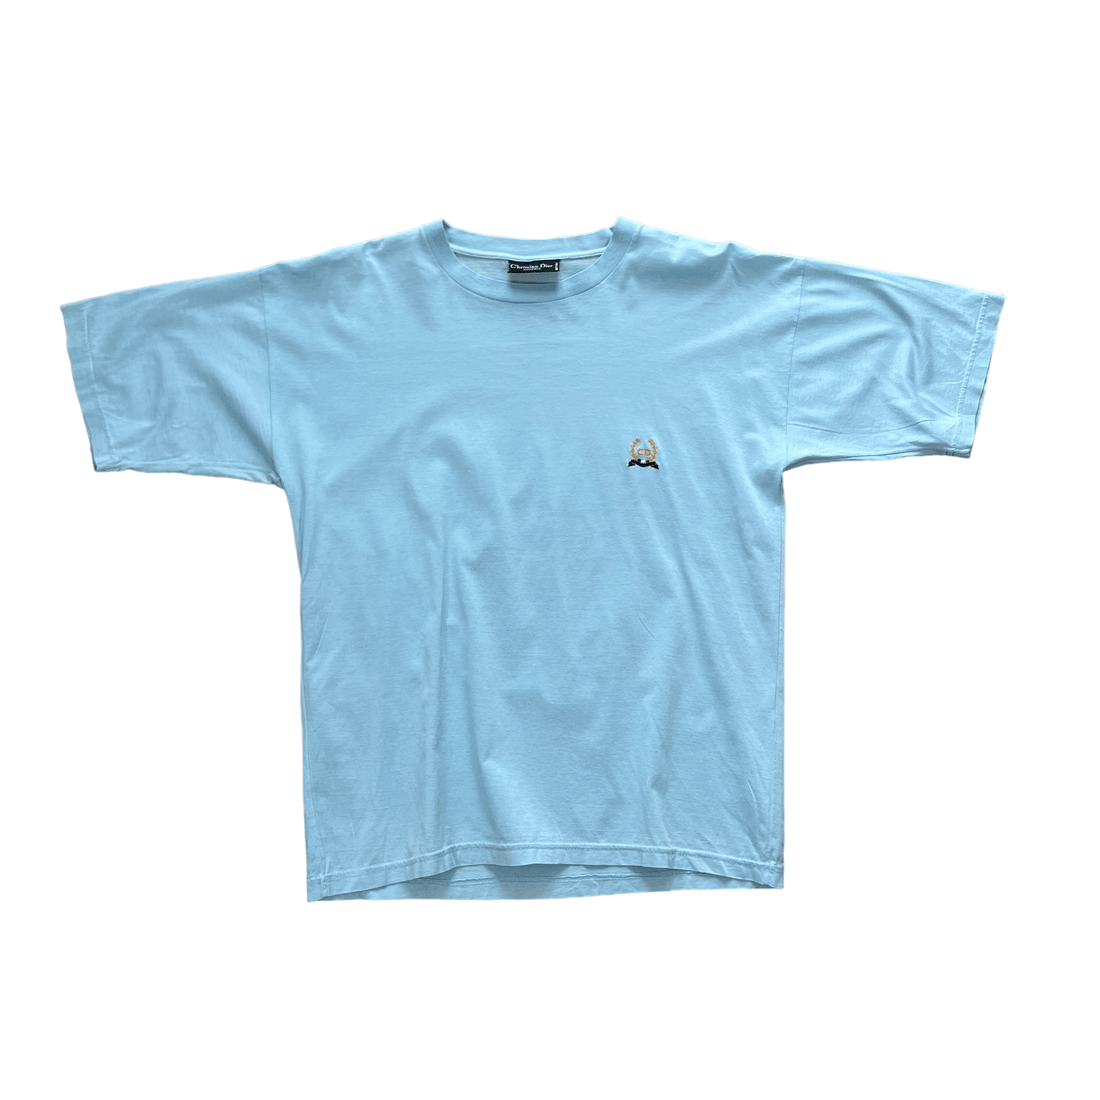 Vintage 90s Baby Blue Christian Dior Tee - Small - The Streetwear Studio